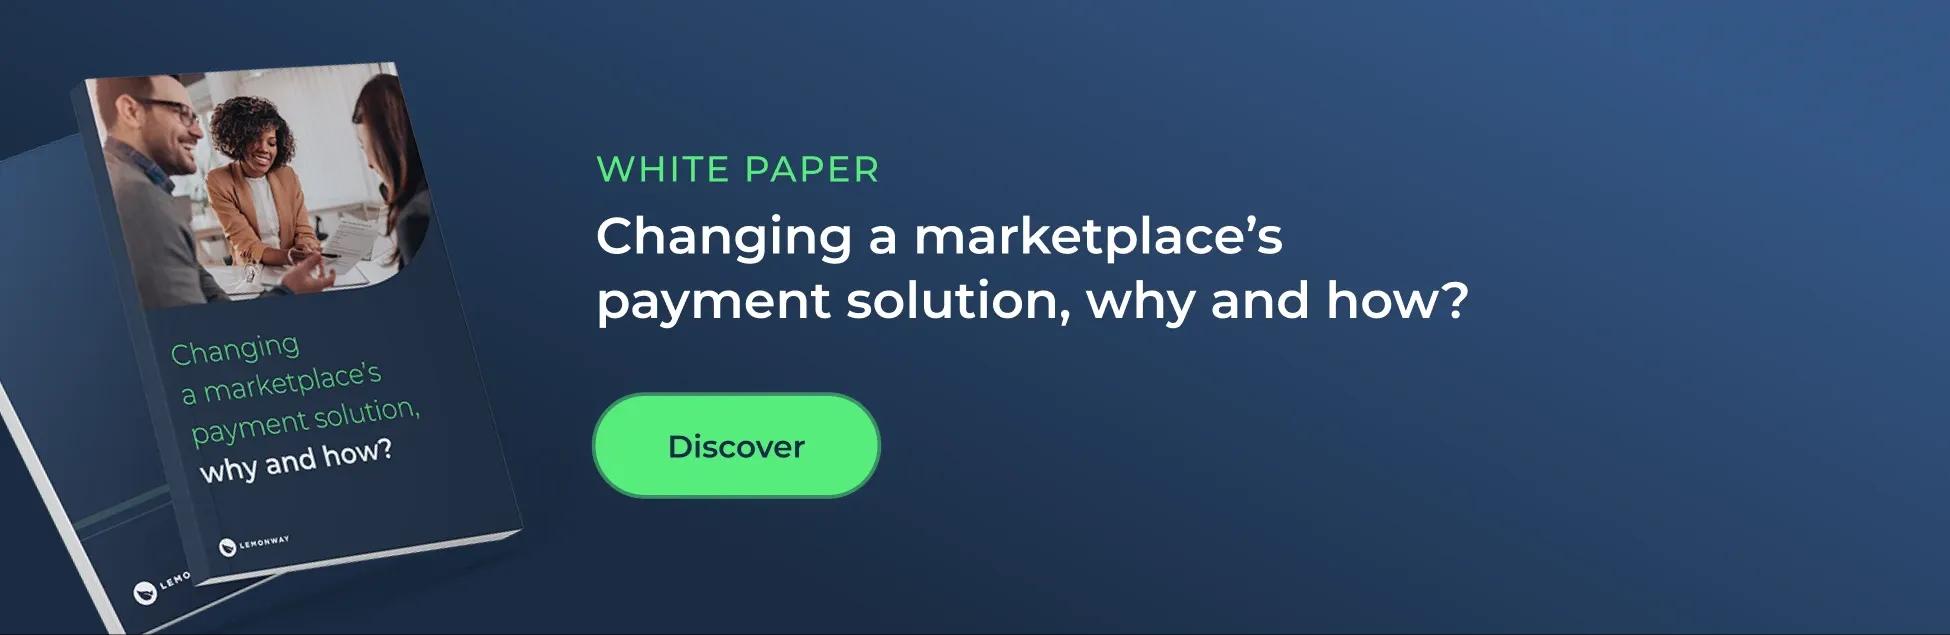 White Paper: Changing a marketplace's payment solution, why and how ?